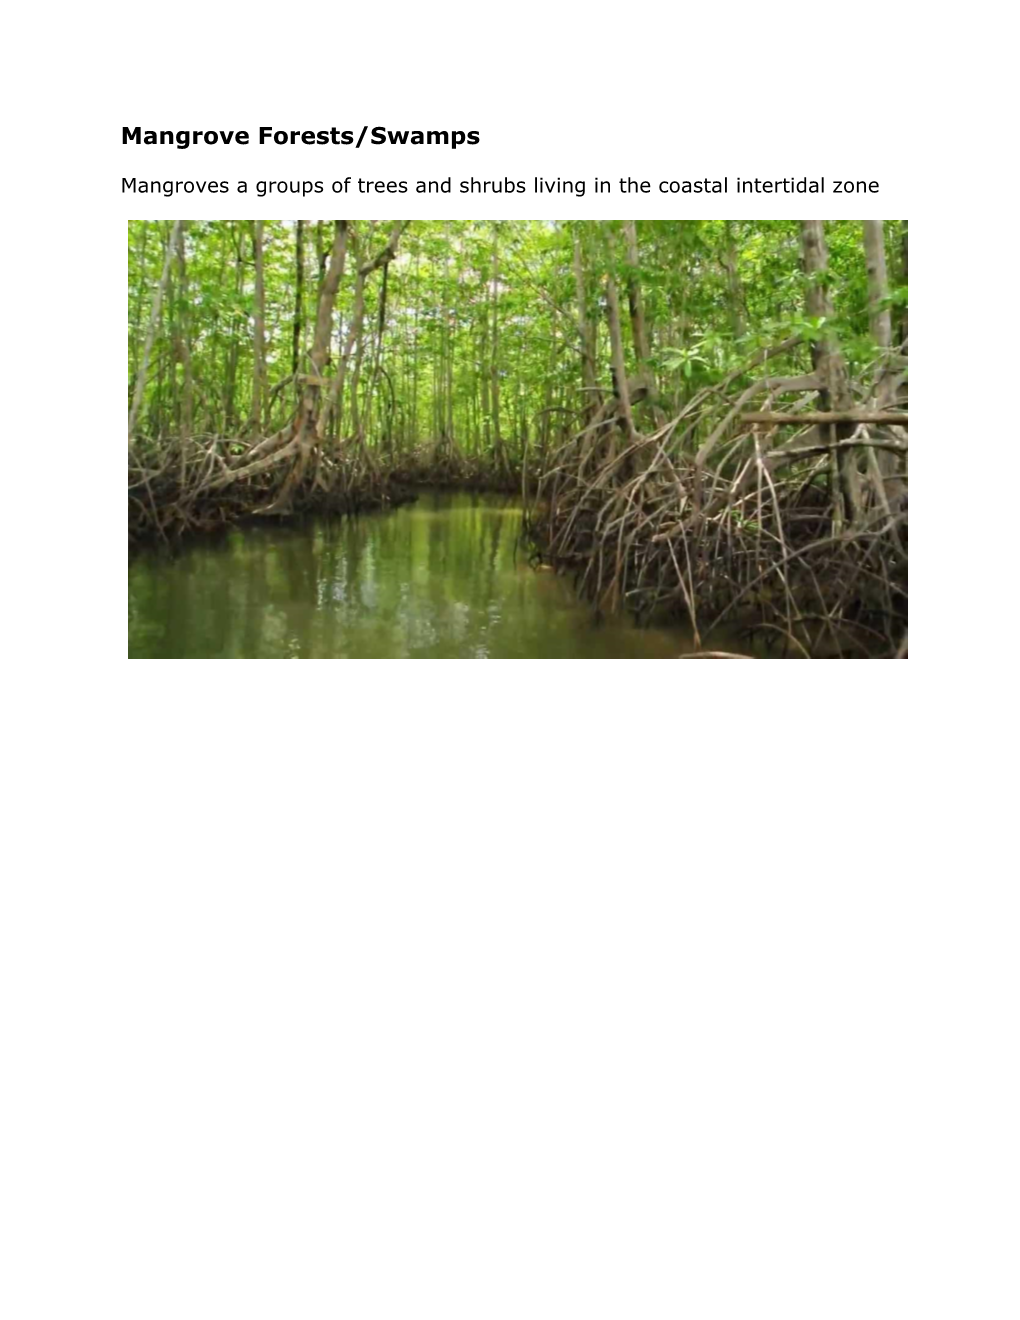 Mangrove Forests/Swamps